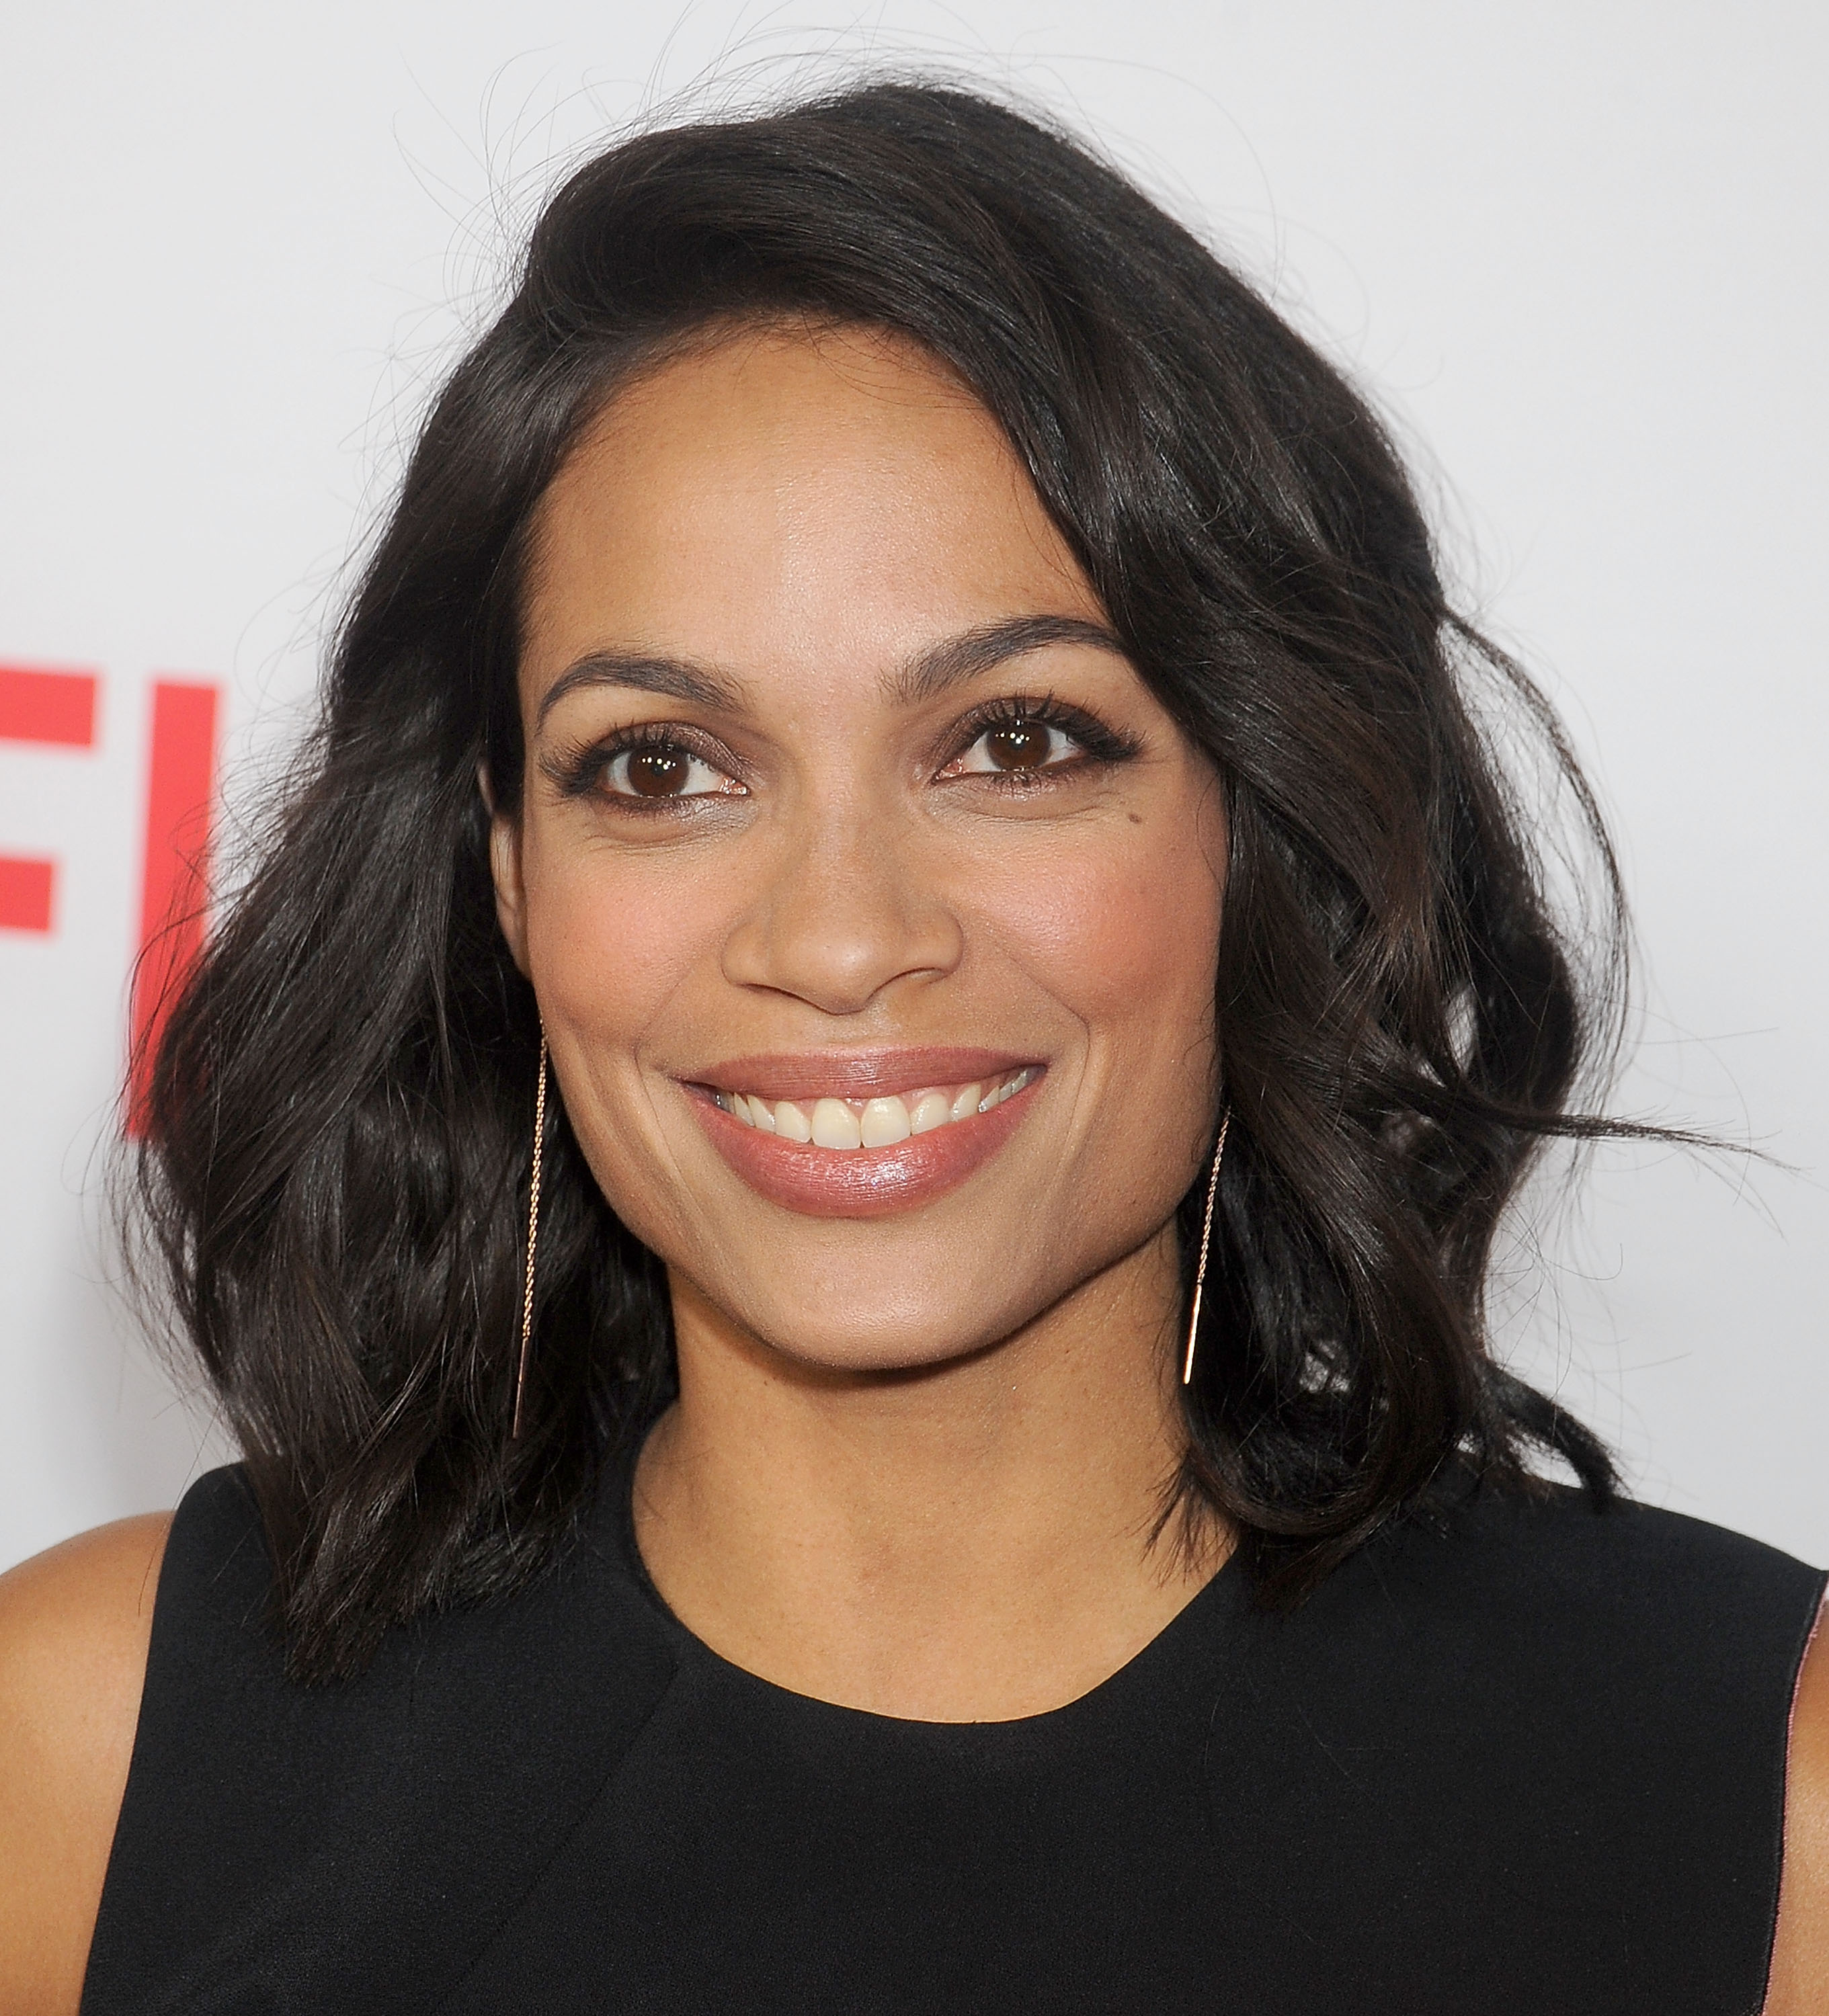 Actress Rosario Dawson arrives at the premiere Of Netflix's "Marvel's Daredevil" at Regal Cinemas L.A. Live on April 2, 2015 in Los Angeles, California. (Gregg DeGuire&mdash;Getty Images)